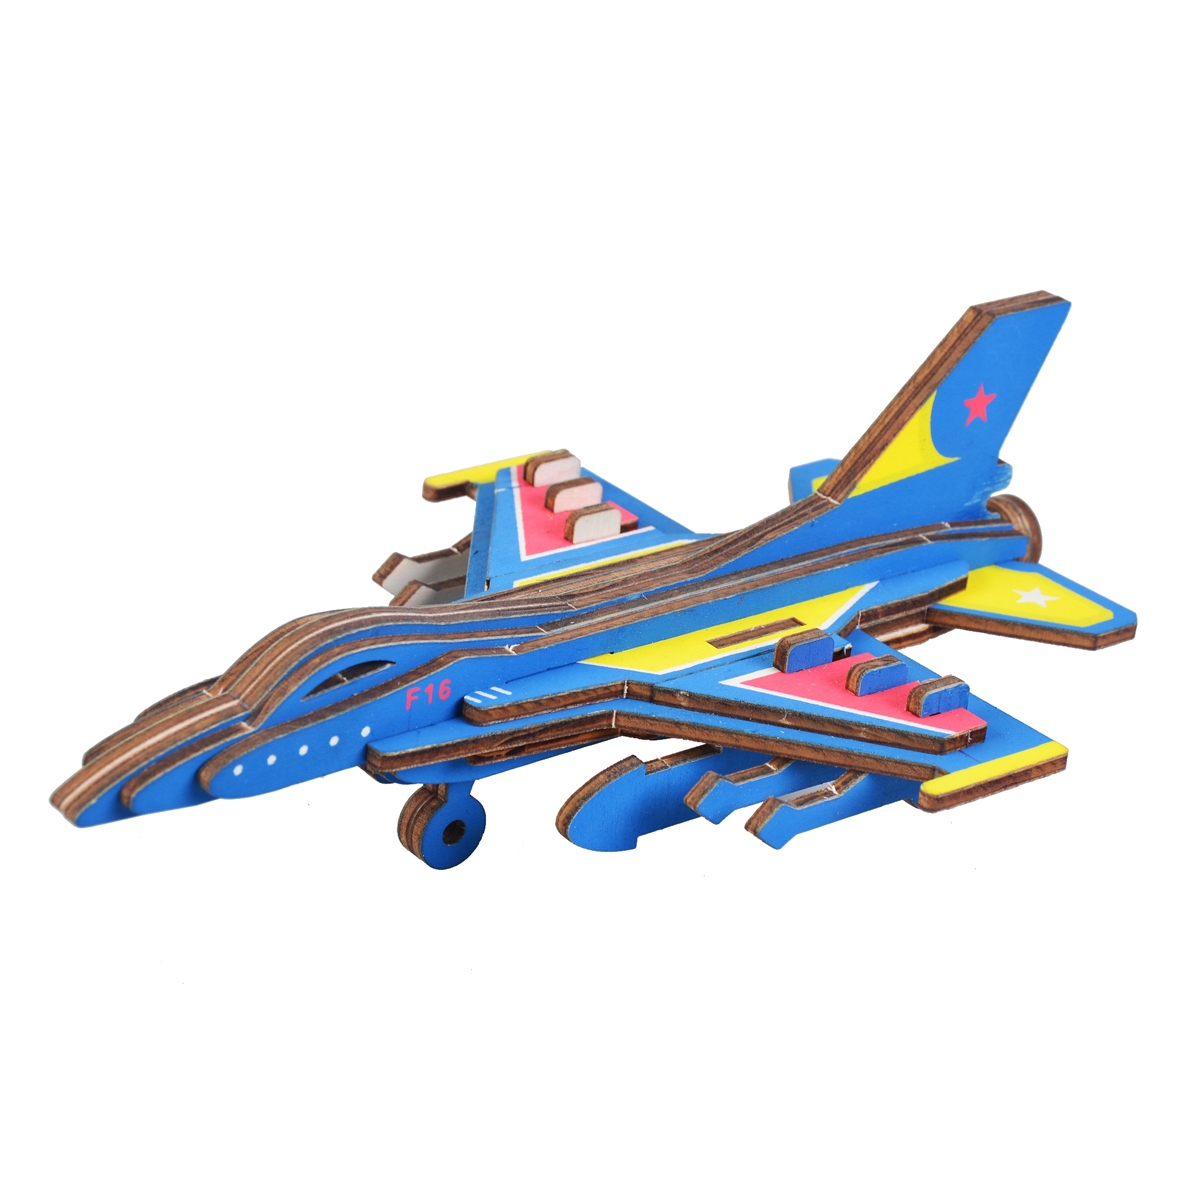 3D-Woodcraft-Assembly-Western-Fighter-Series-Kit-Jigsaw-Puzzle-Decoration-Toy-Model-for-Kids-Gift-1632732-3